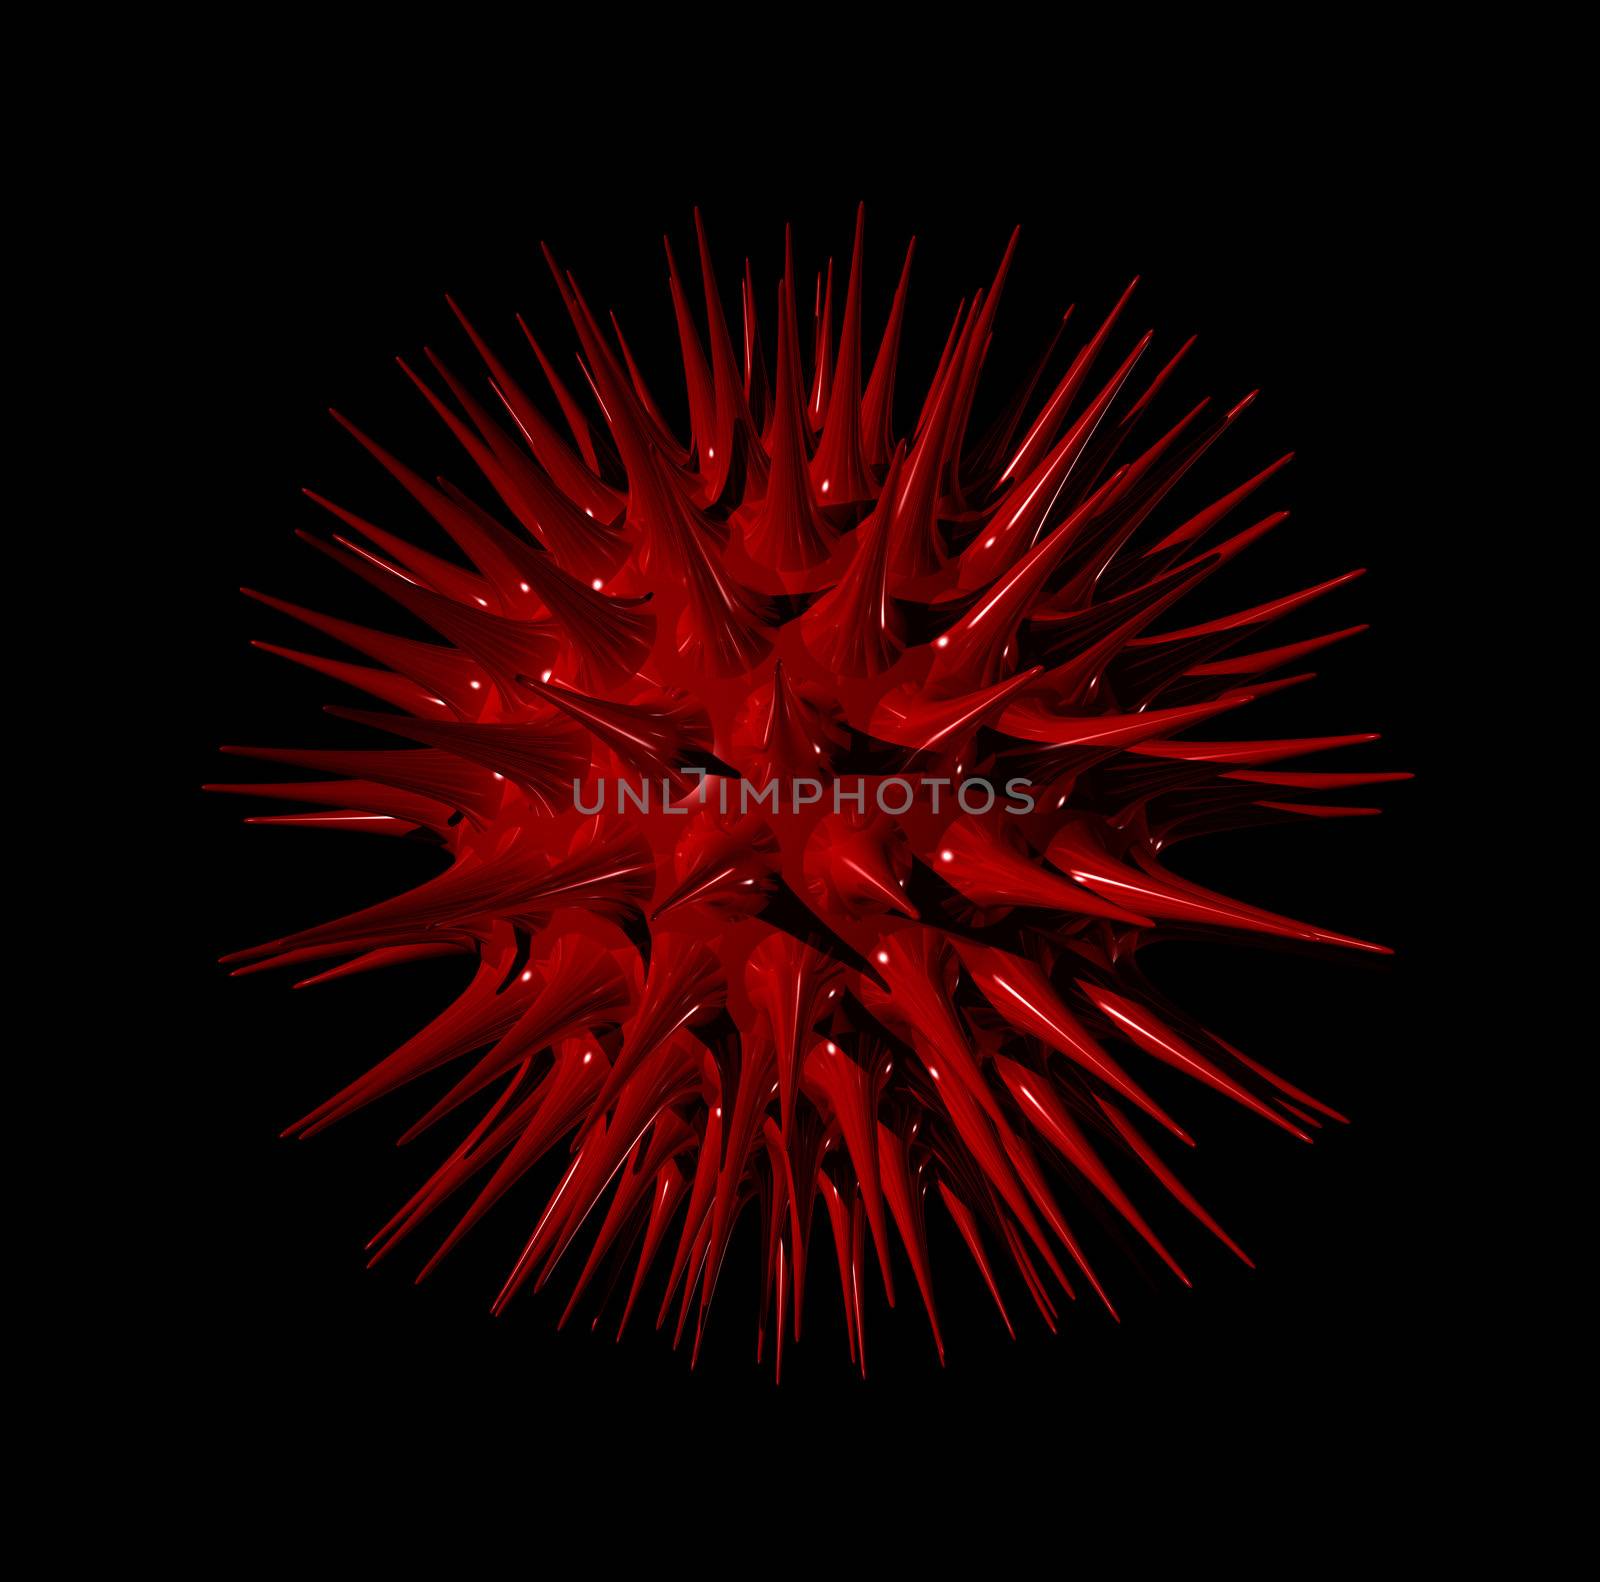 three dimensional illustration of a red virus isolated on black background